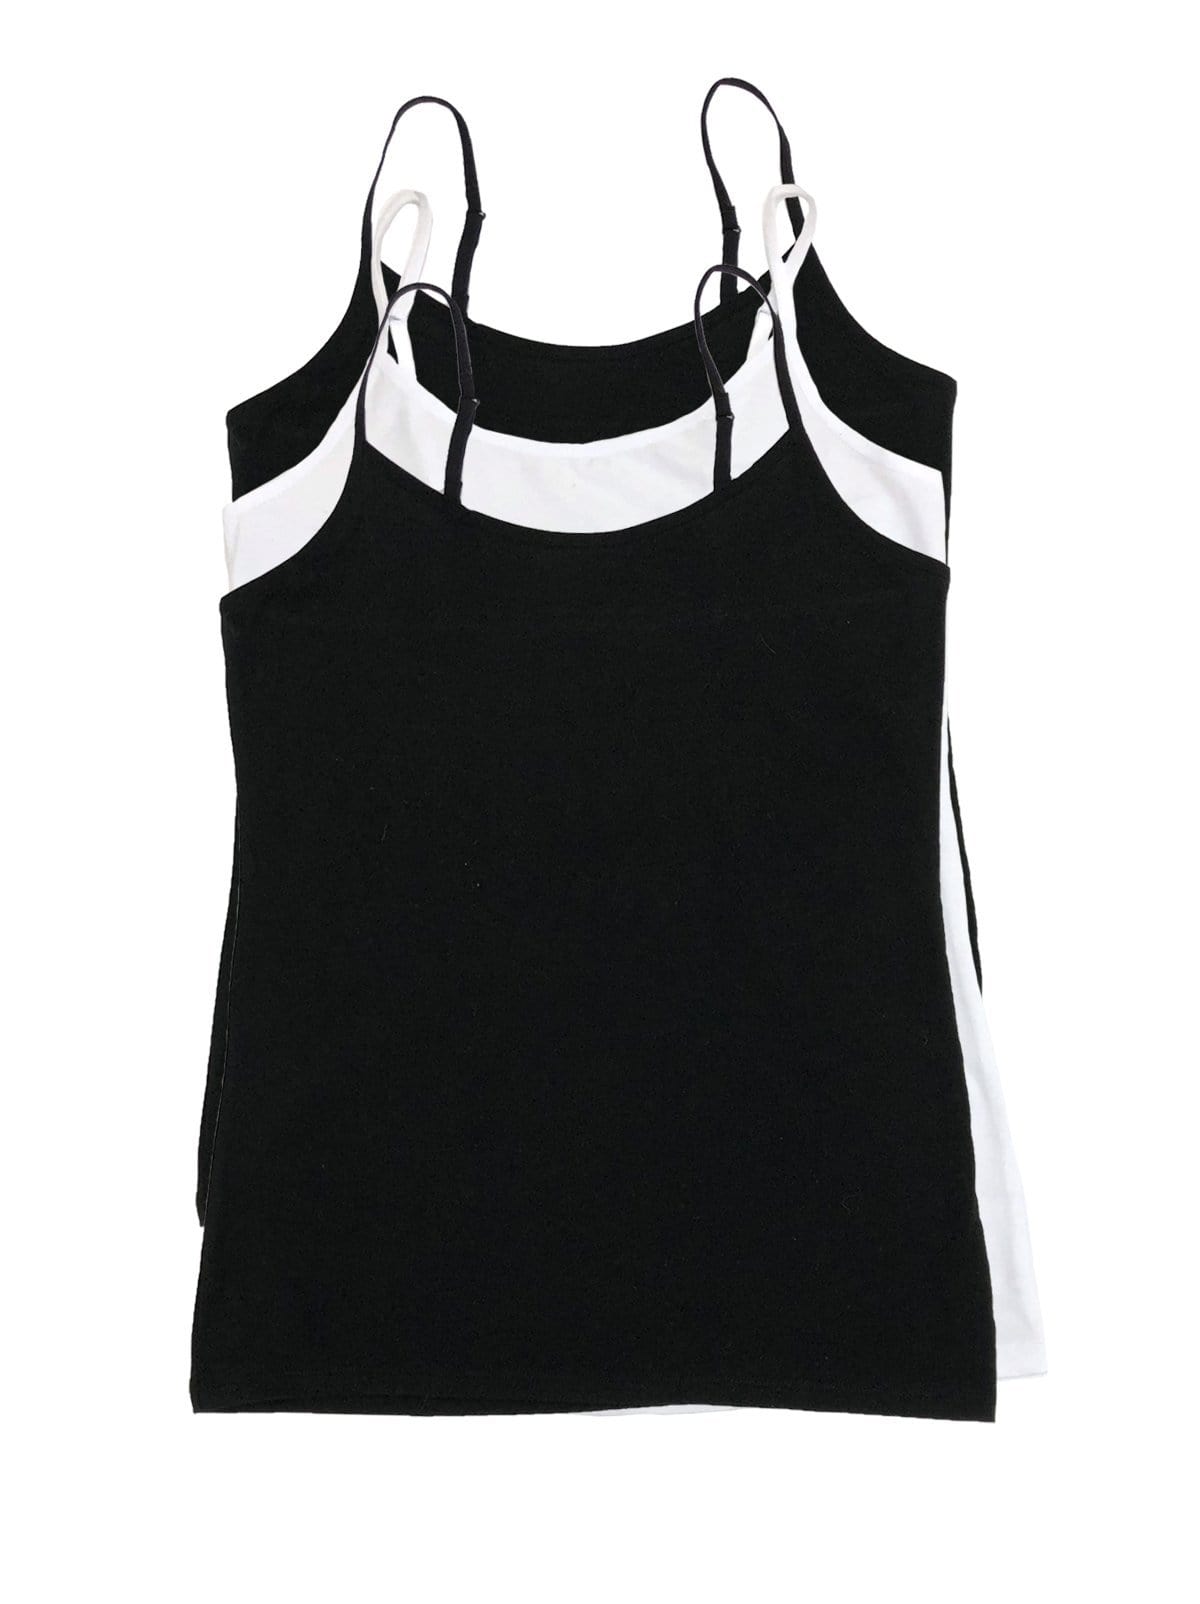 Image of Cotton Modal Stretch Camisole 3-Pack